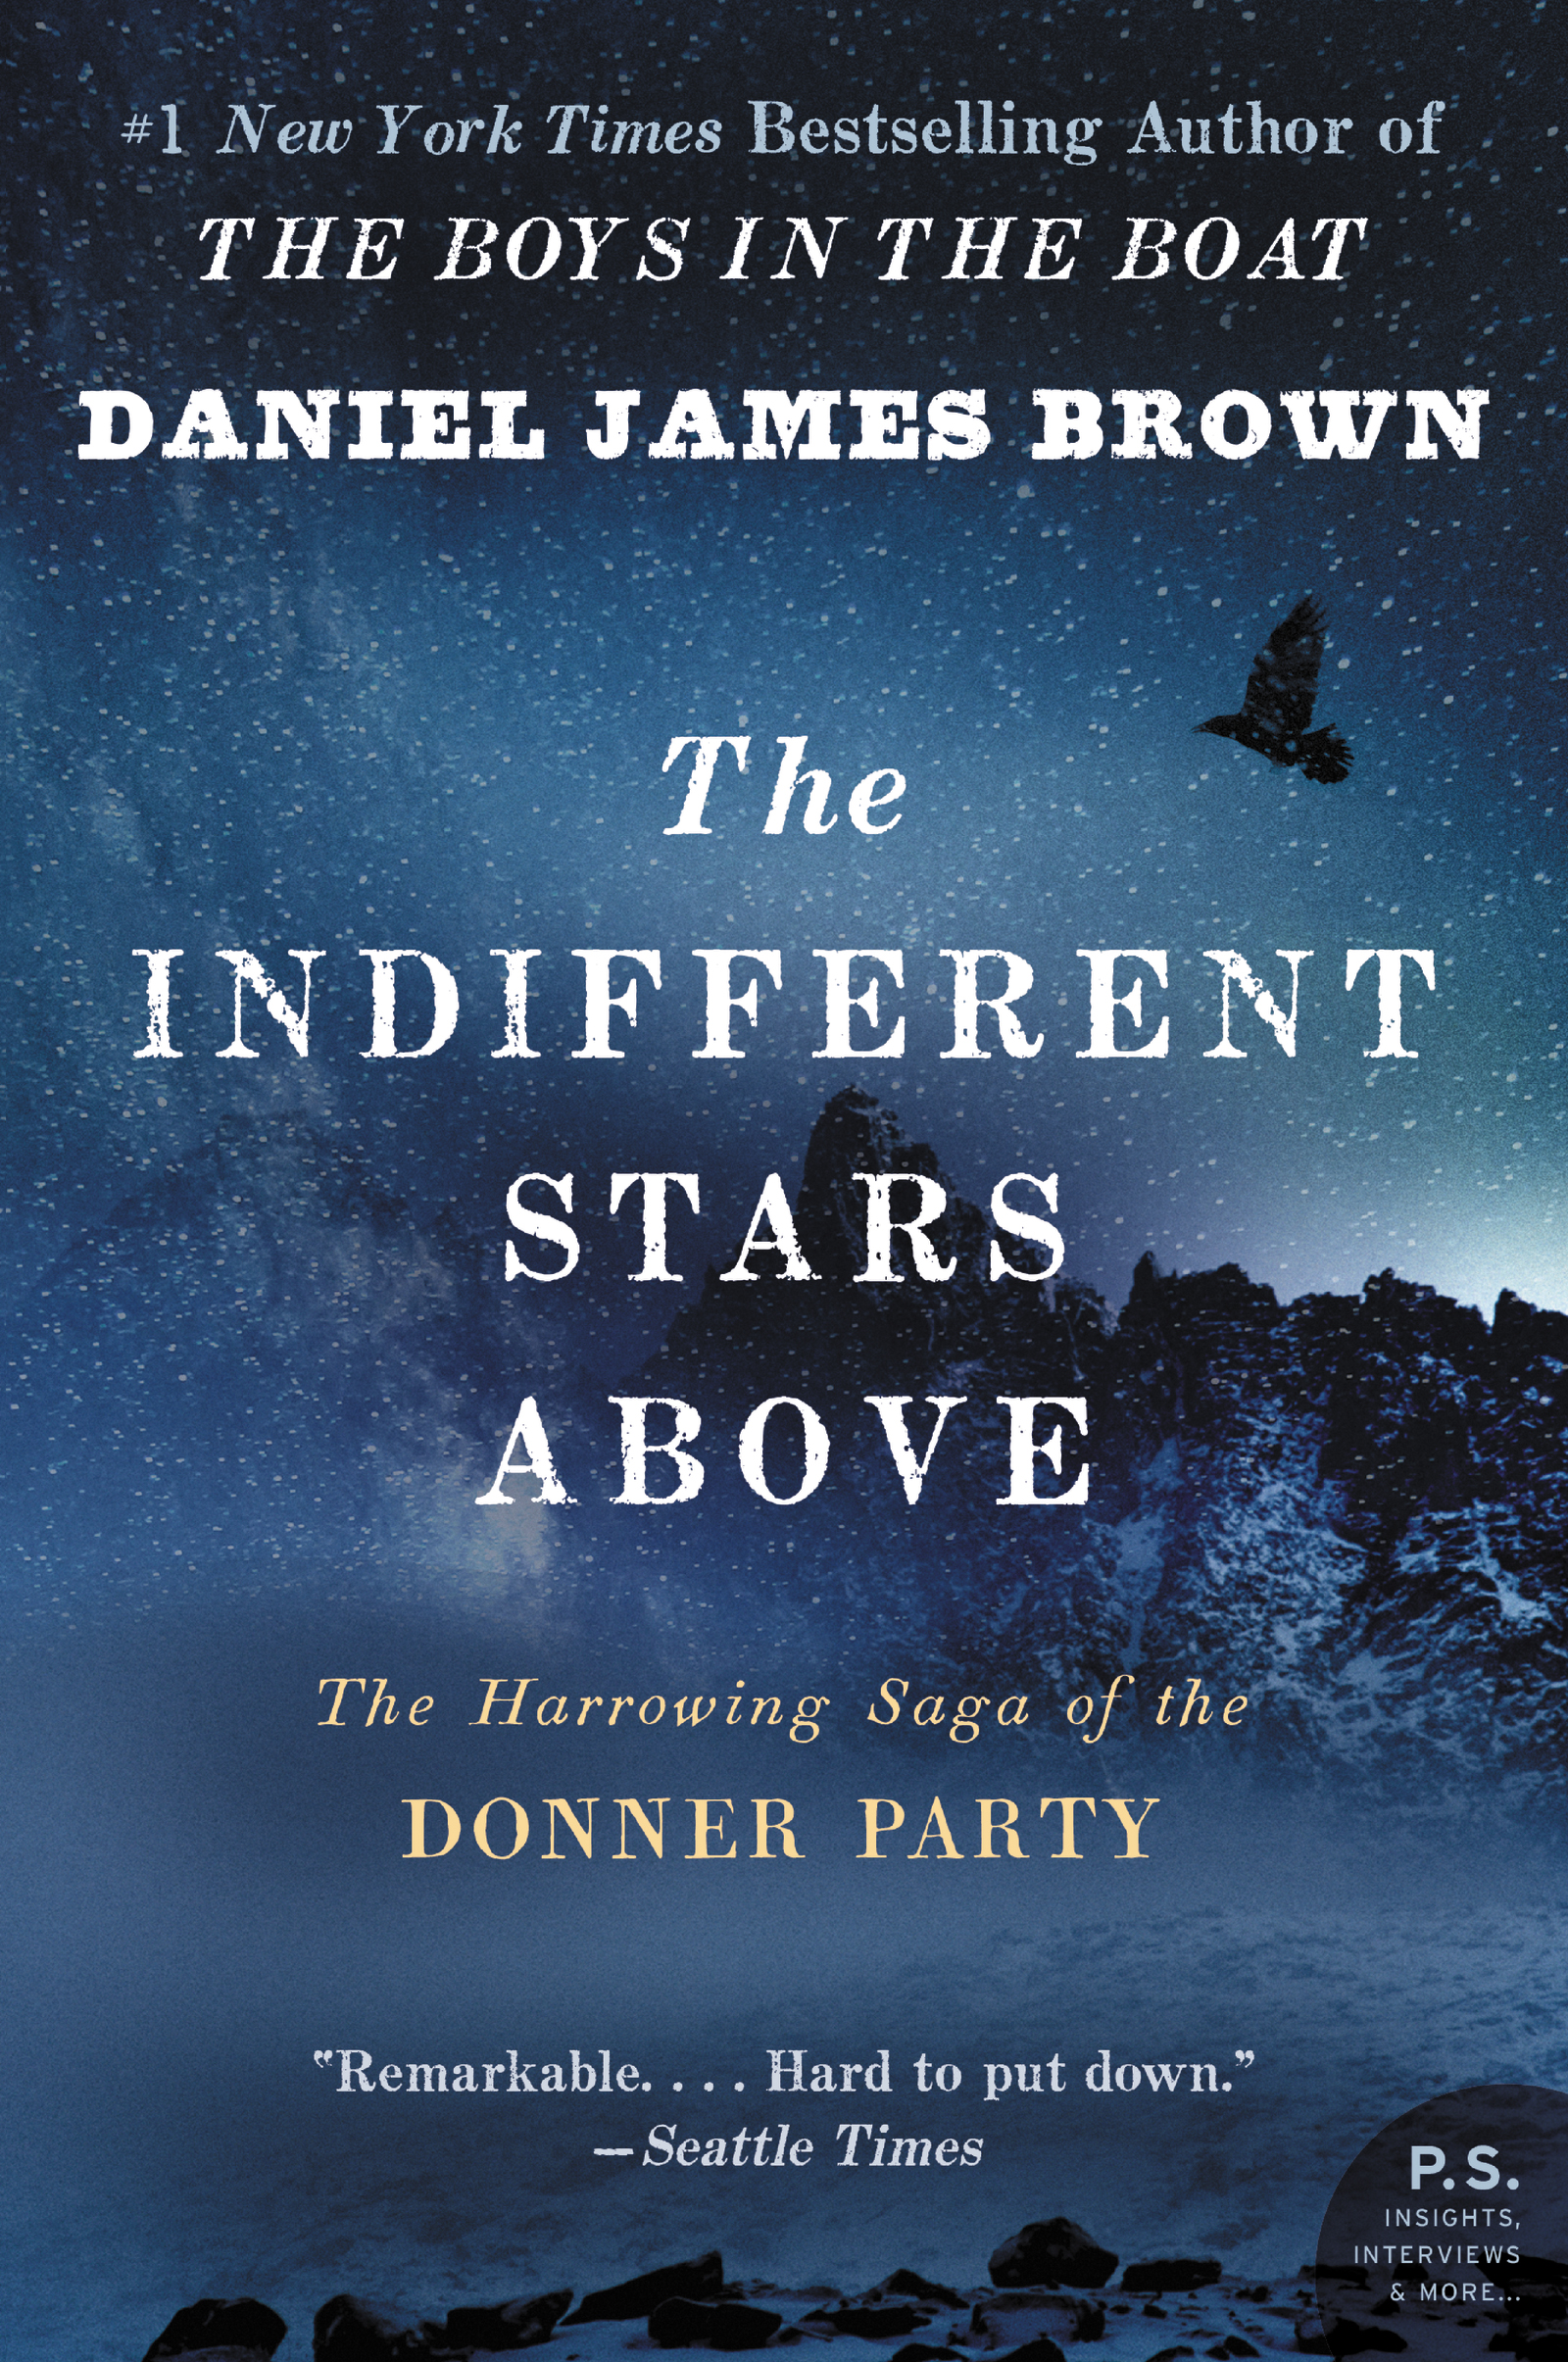 The Indifferent Stars Above - 10-14.99